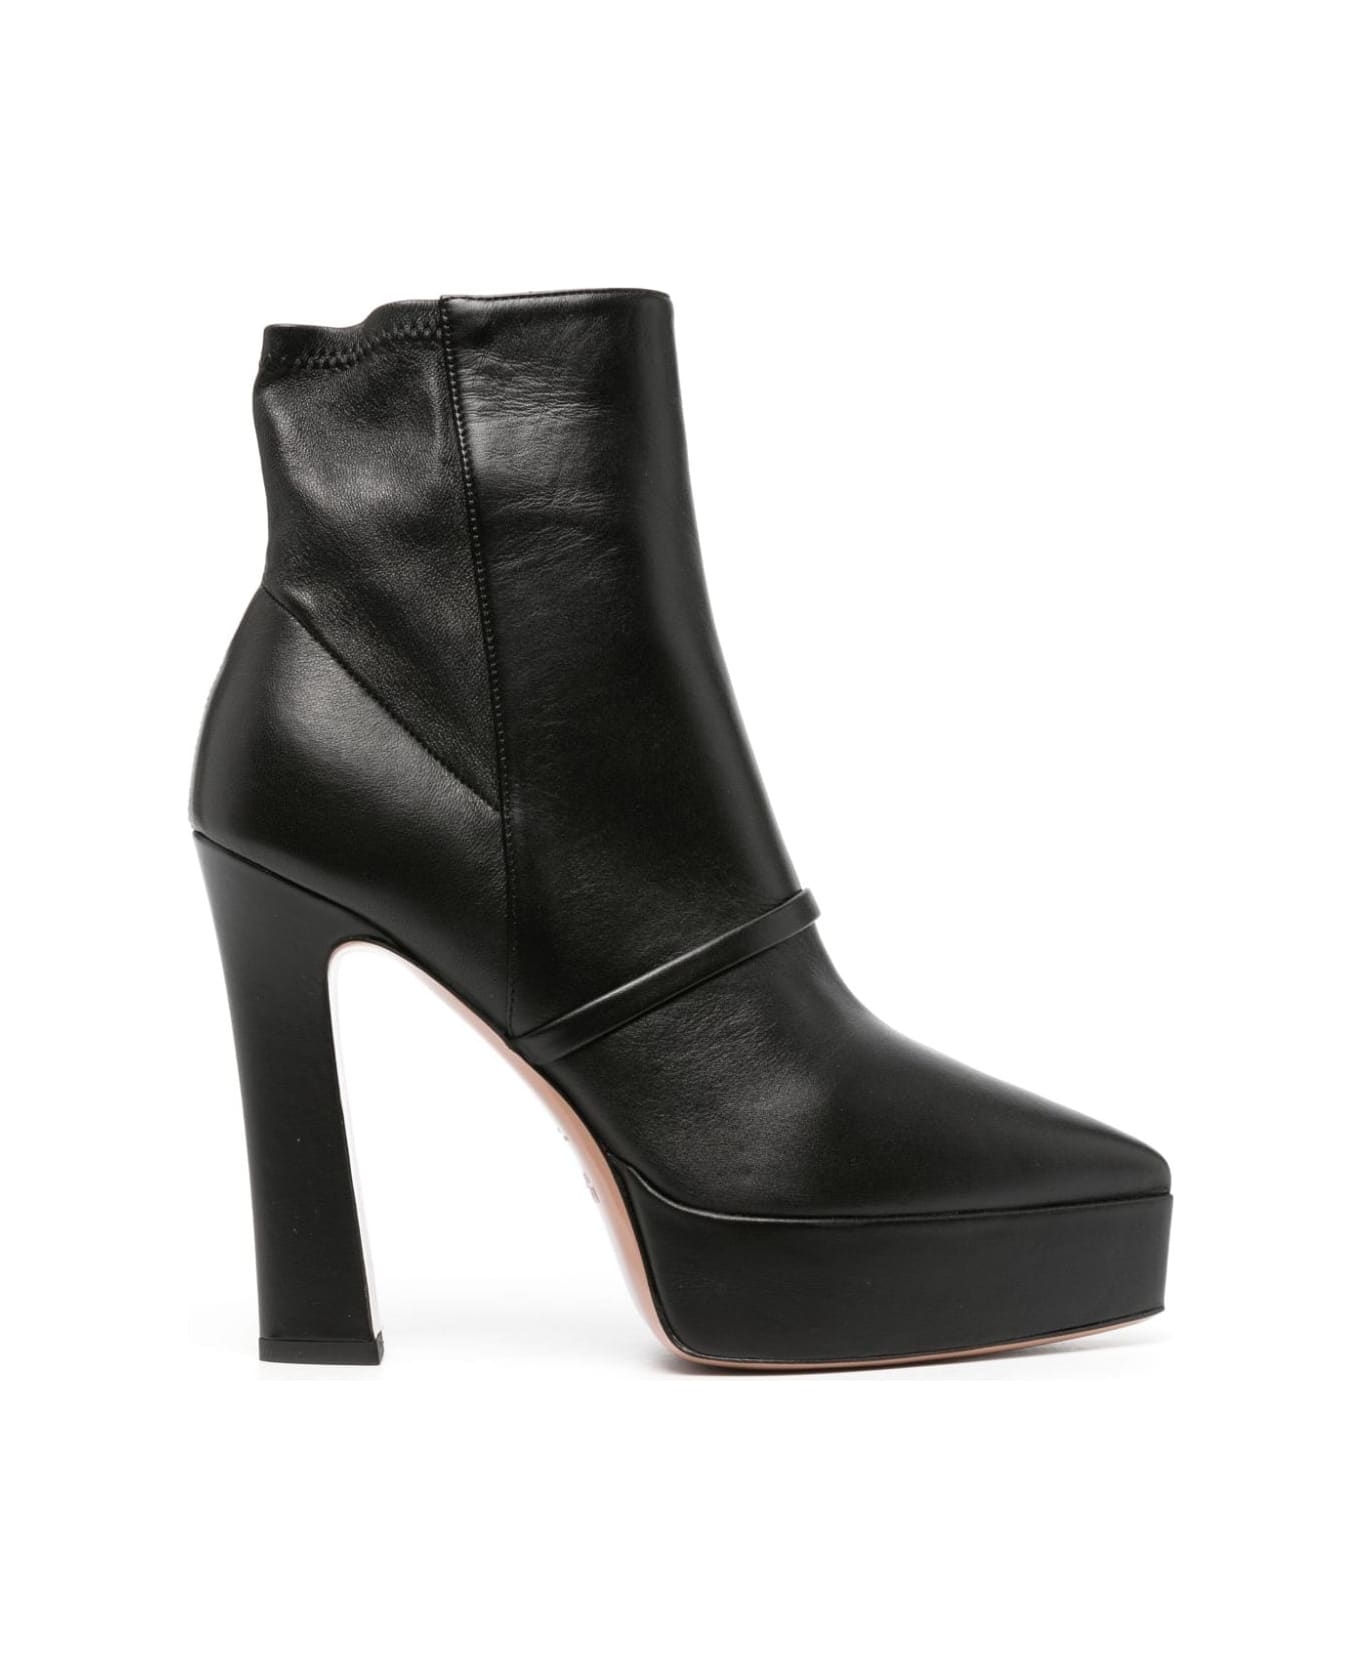 Malone Souliers Rue 125 High Heel Ankle Boots - Black  Black ブーツ